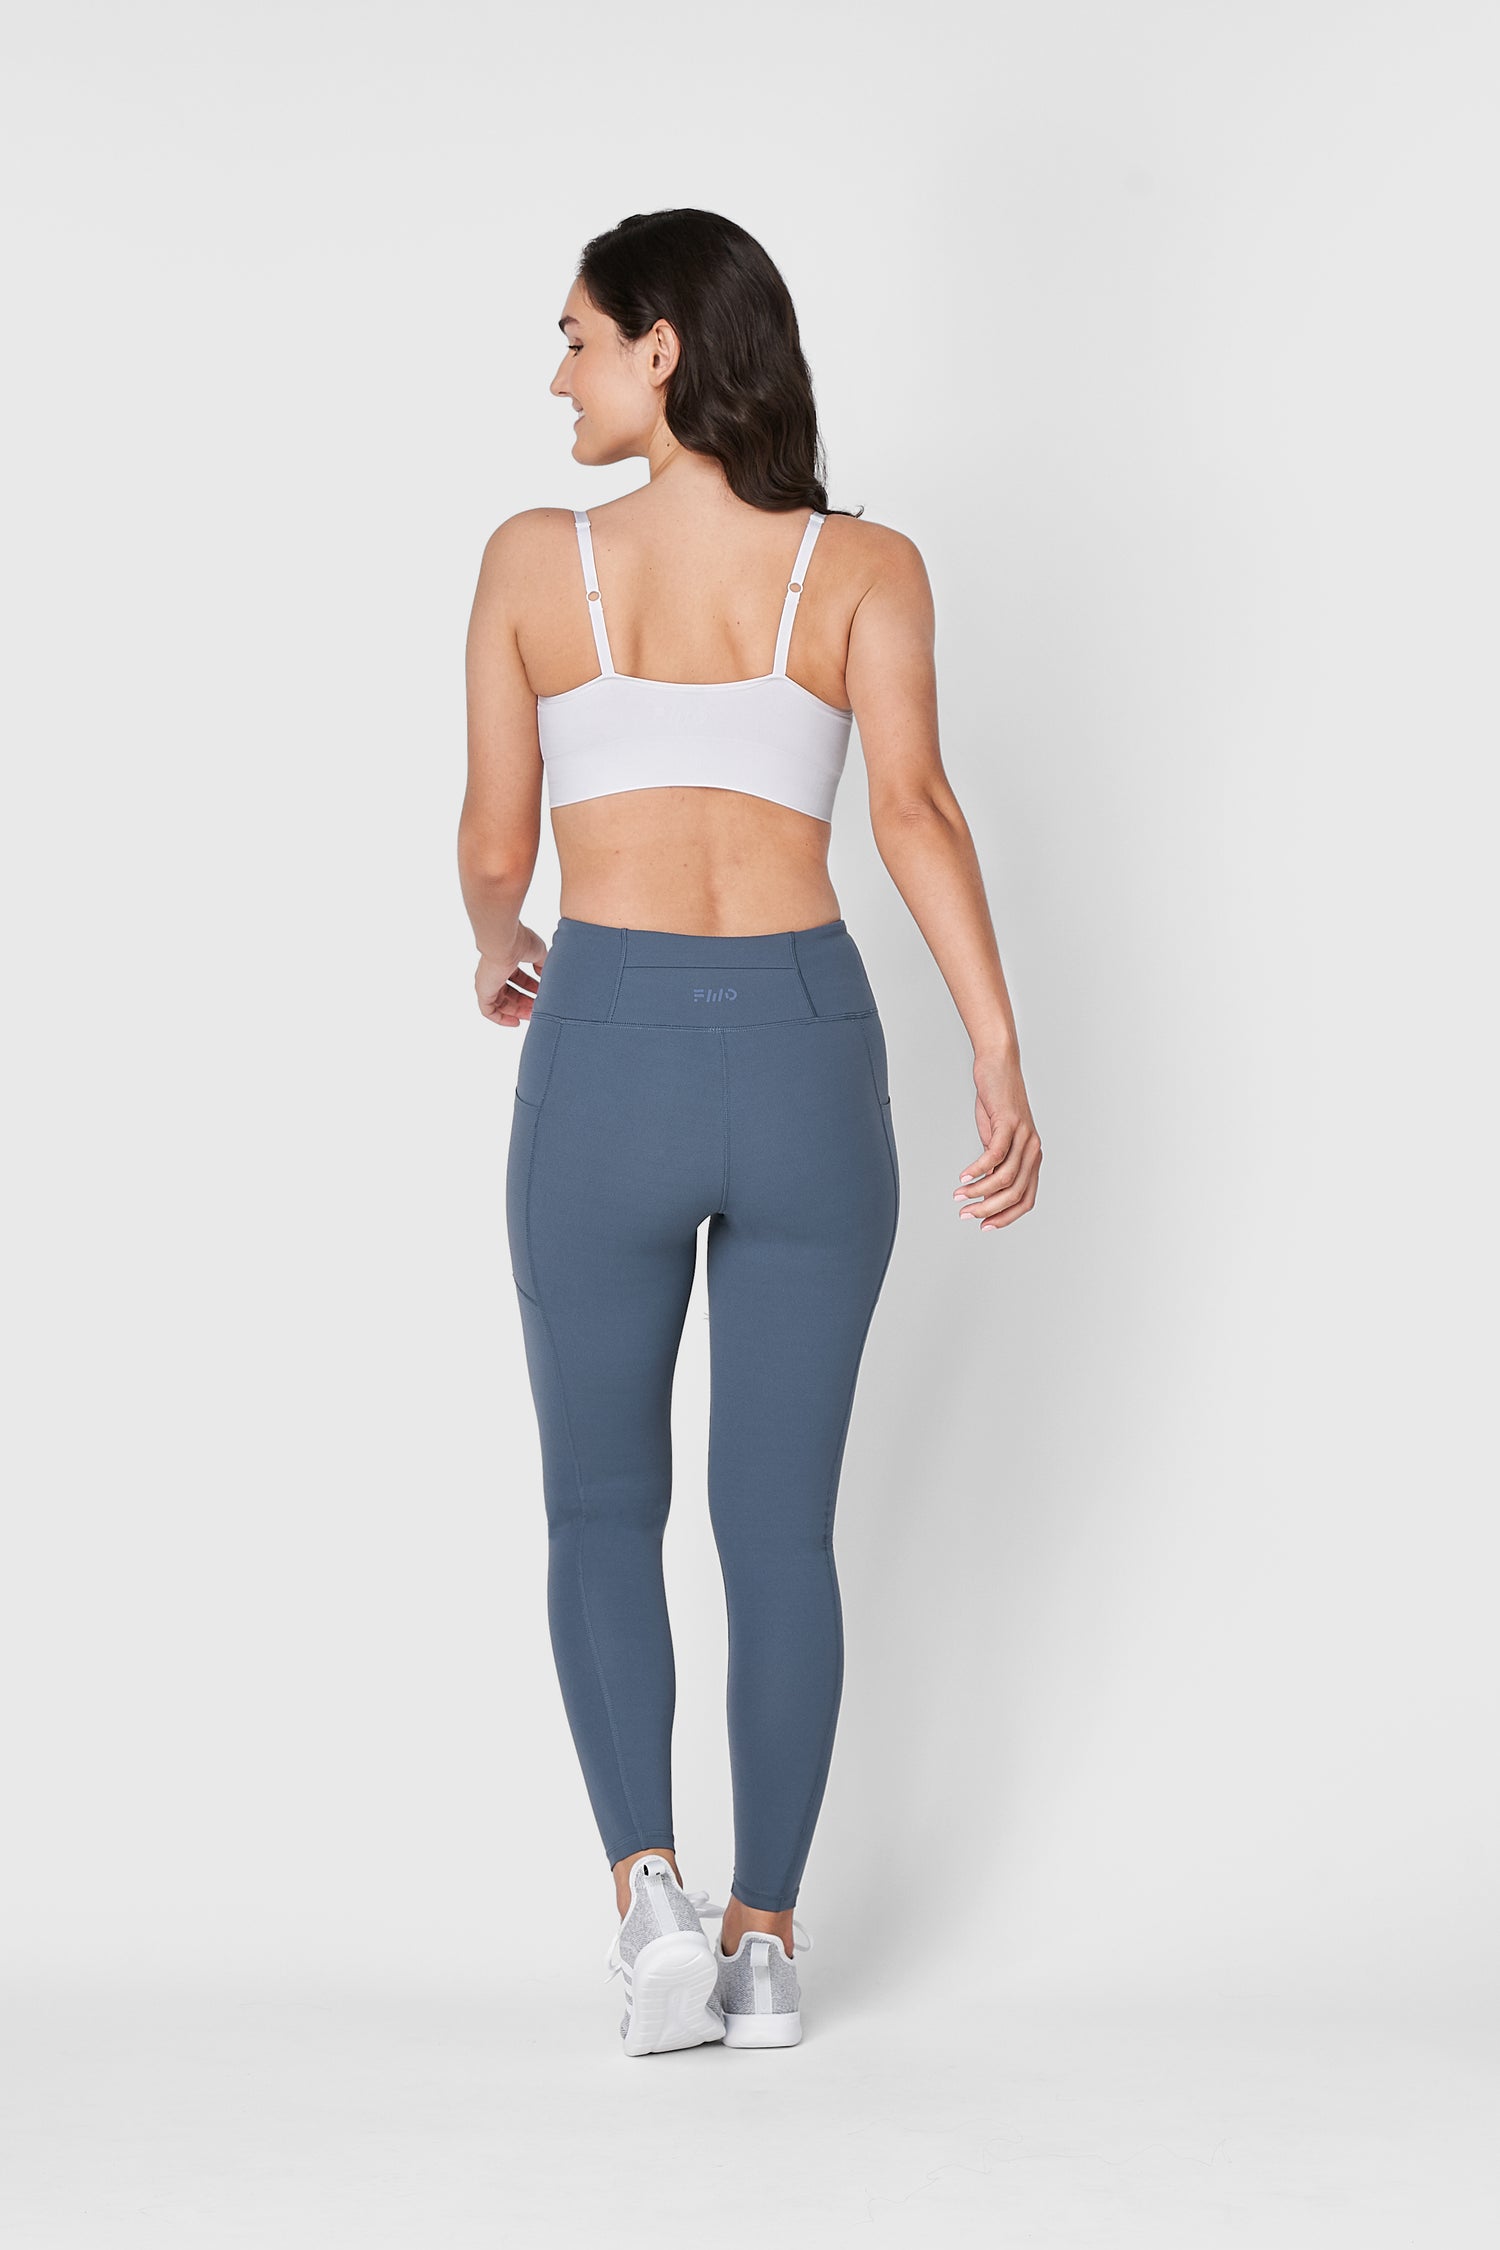 FWD Women's Friday Everyday Leggings, Pants, High Rise, Stretch